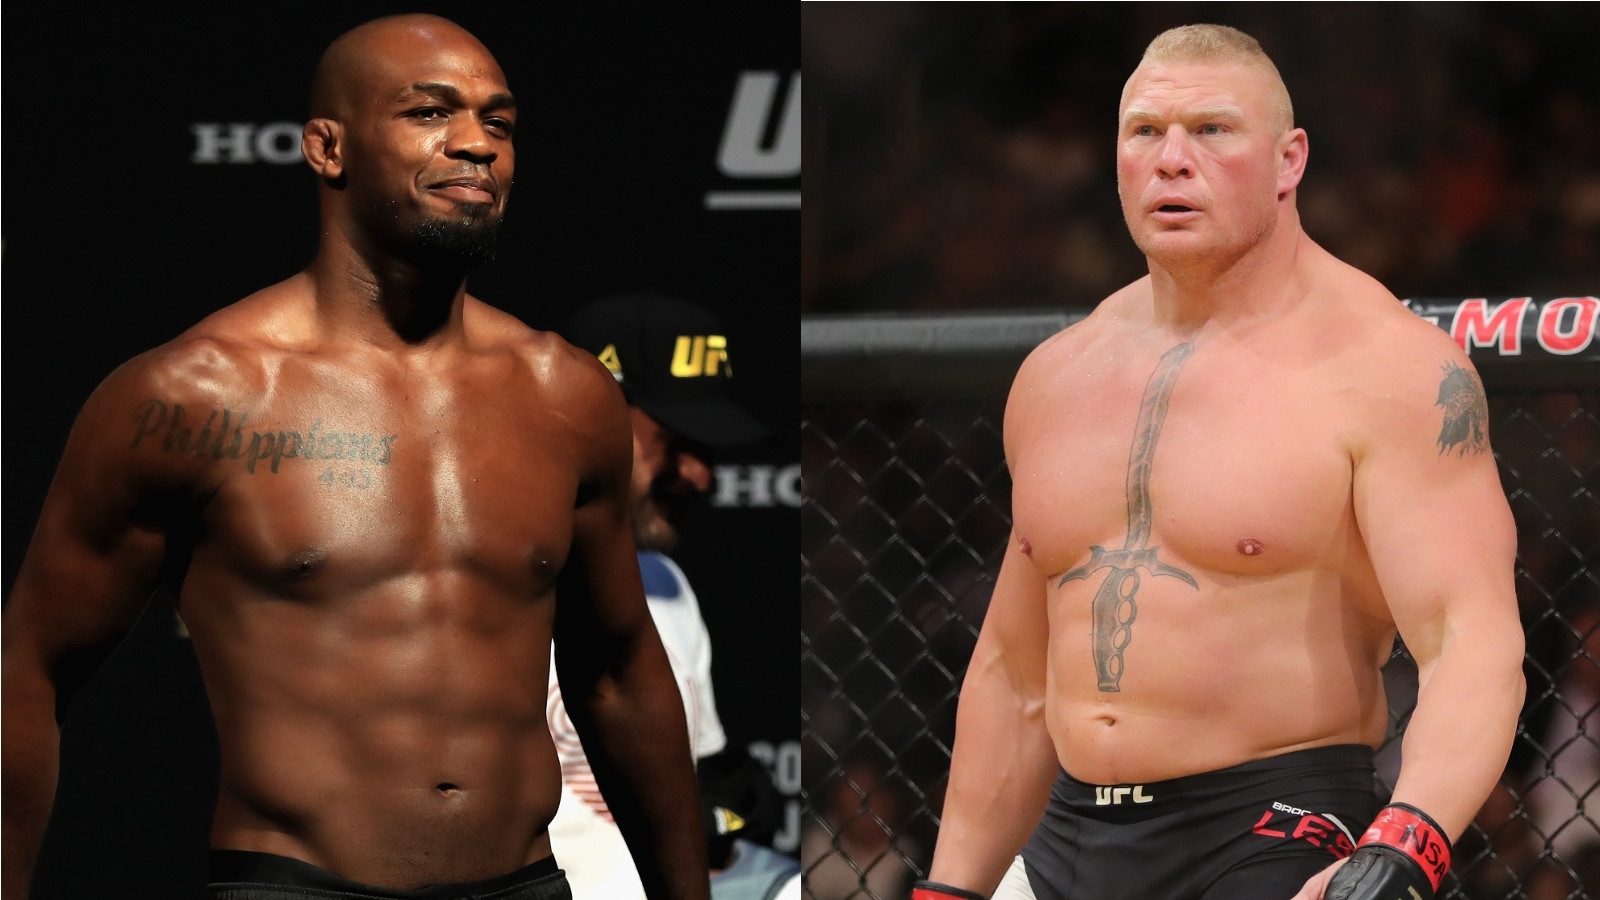 When could a Jon Jones vs Brock Lesnar superfight actually take place?